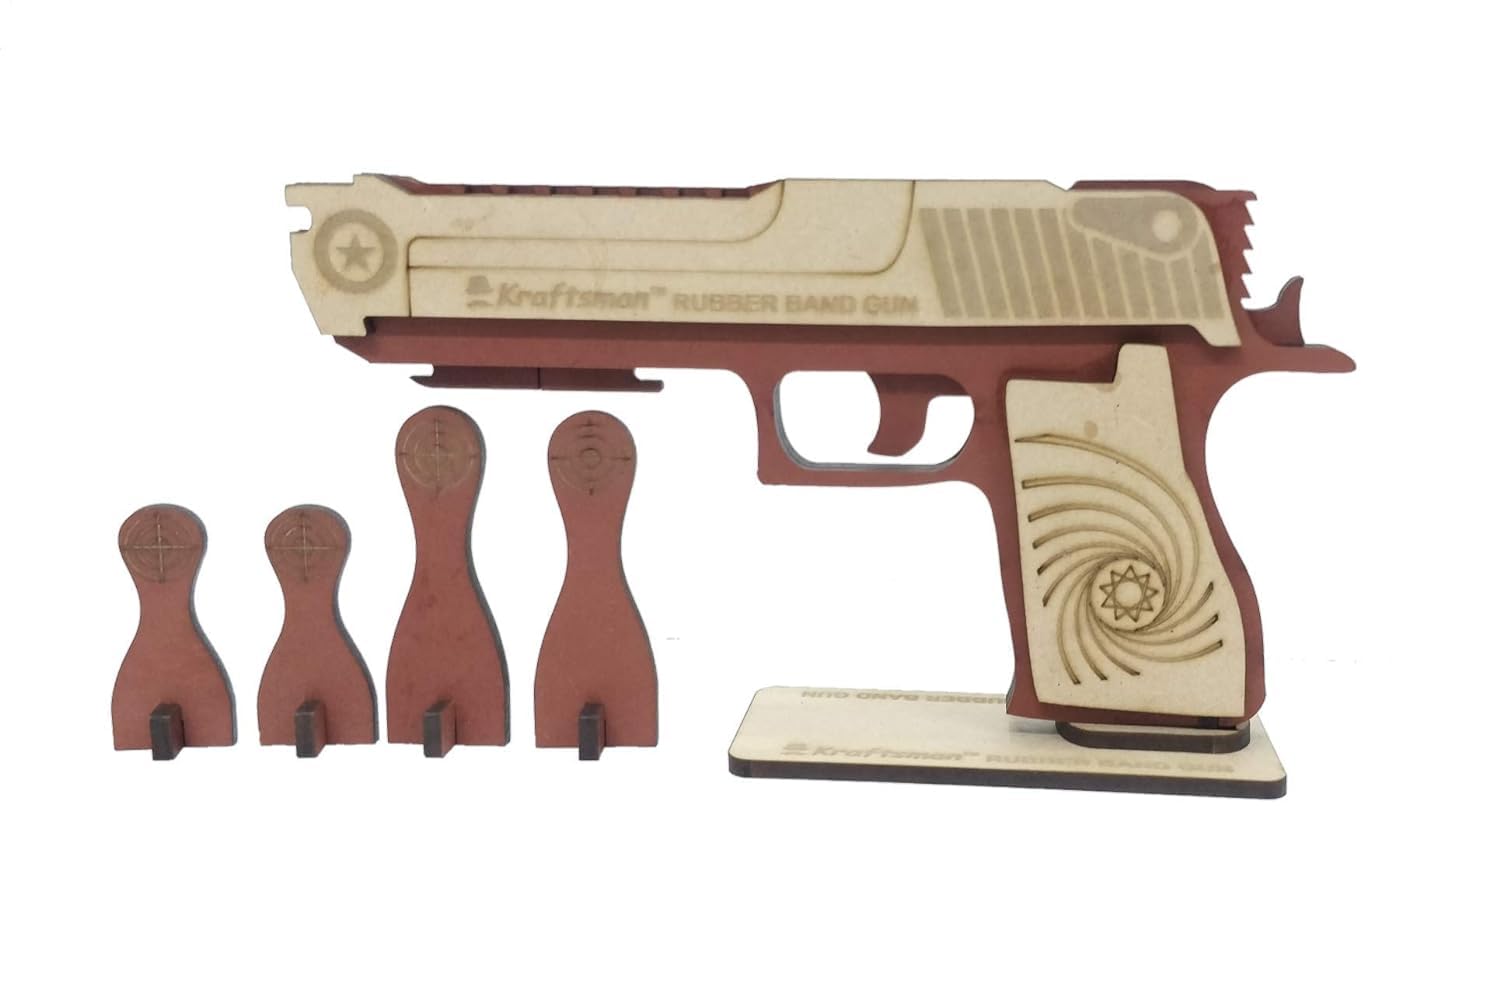 Braintastic Wooden Semi-Automatic Rubber Band Shooting Gun Toys with 5 Rapid Fire Shots for Kids (Beige Brown)